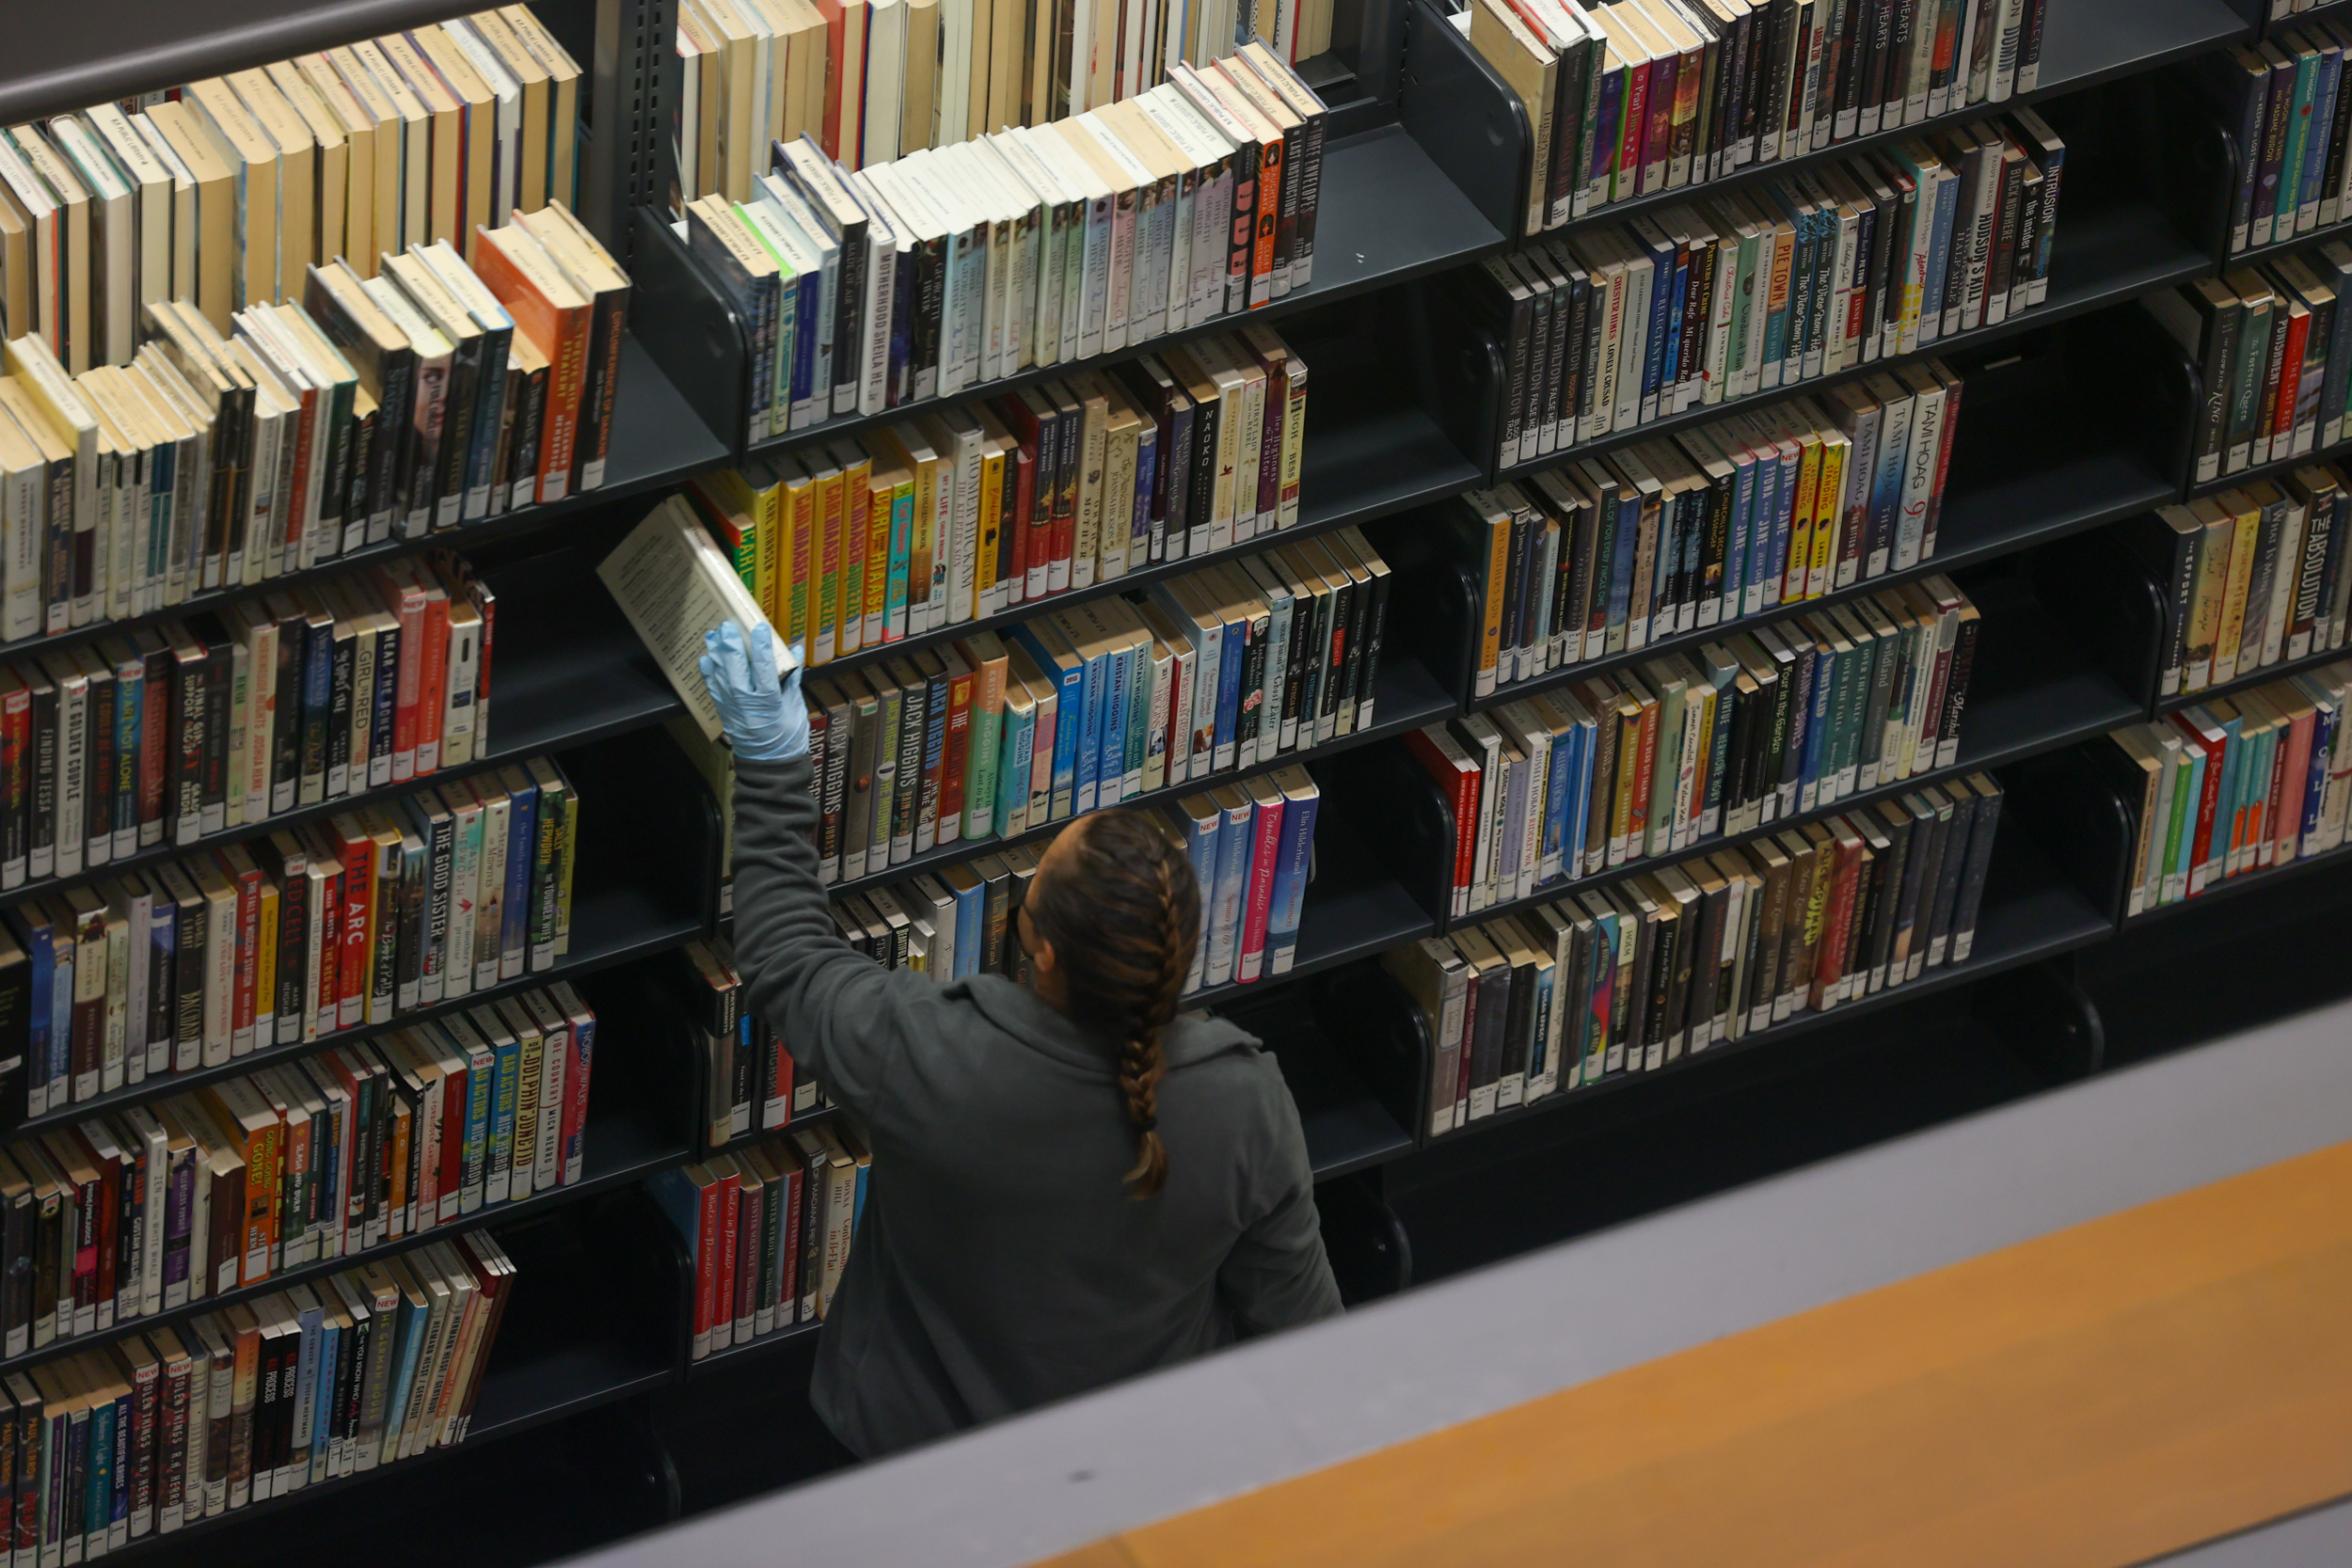 A person is reaching for a book on a high shelf in a library with many books.